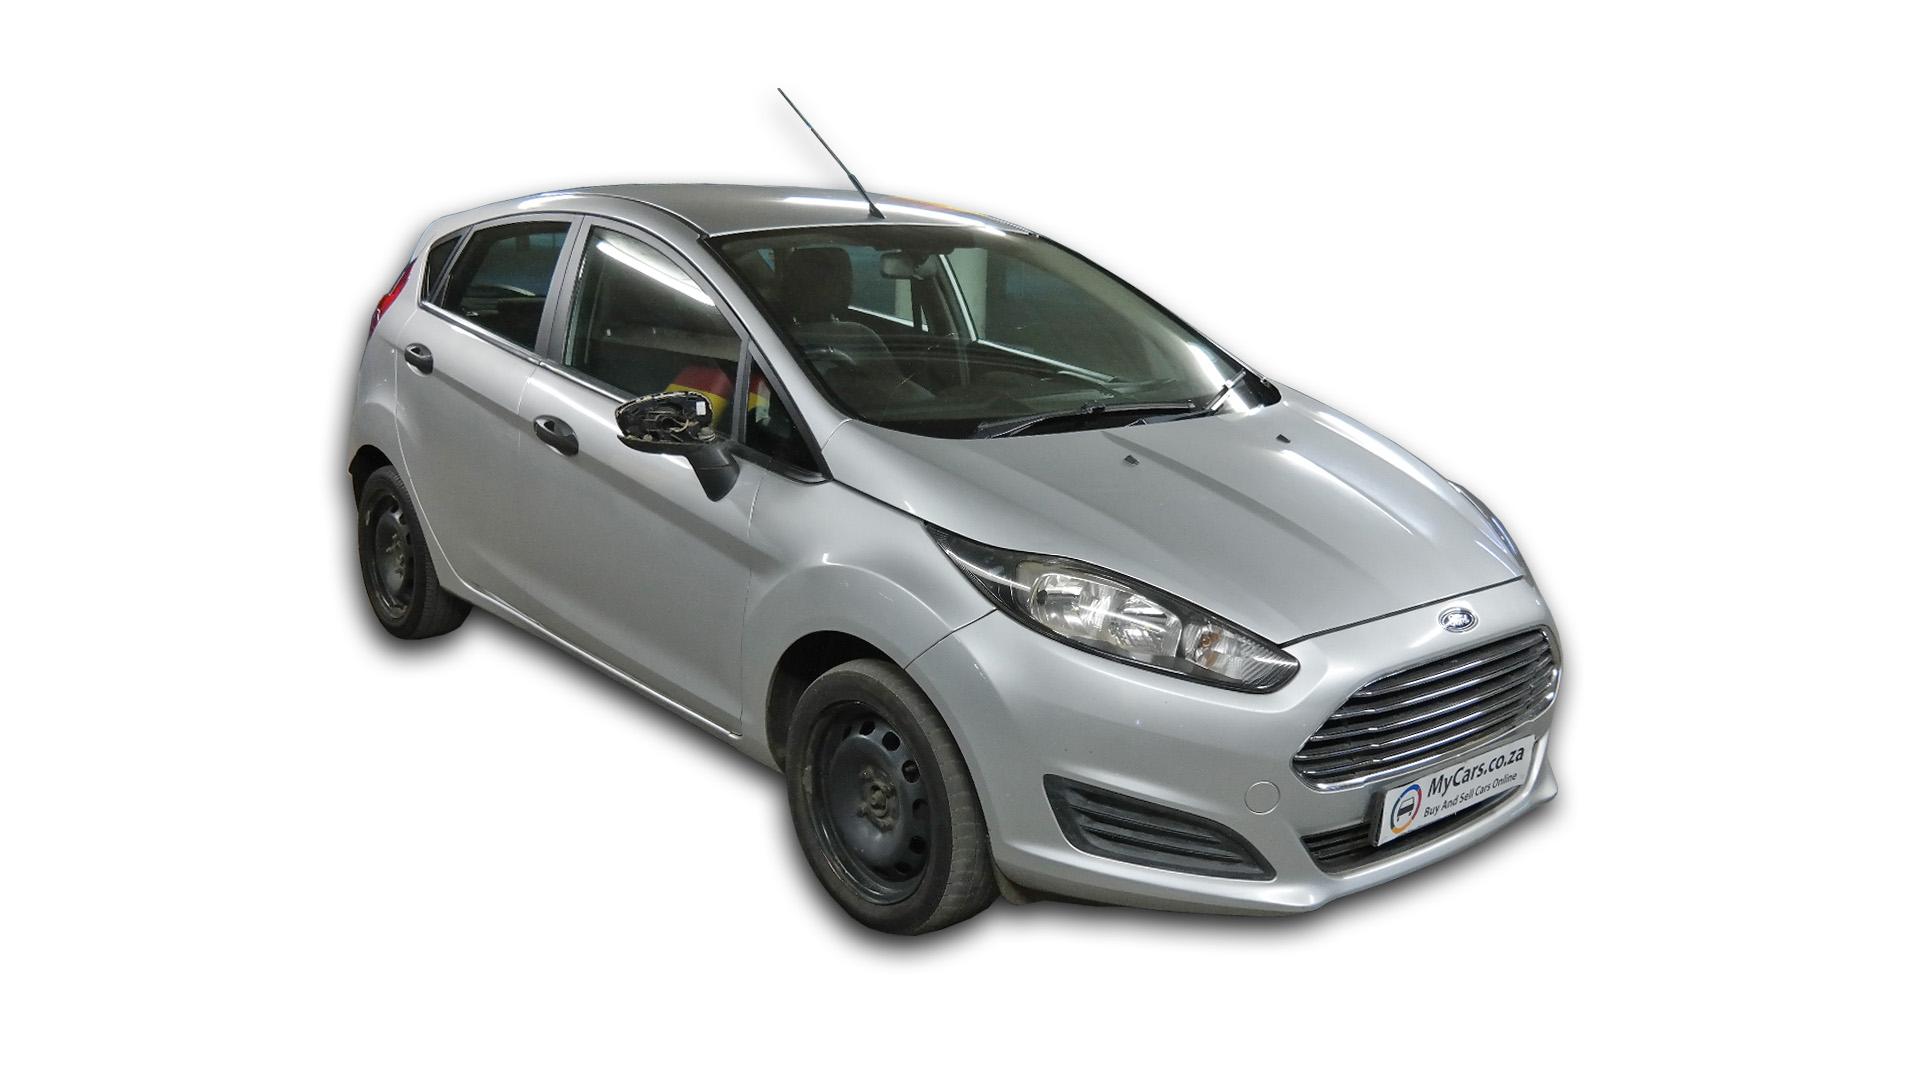 Ford Fiesta 1.4 Ambiente 5 DR